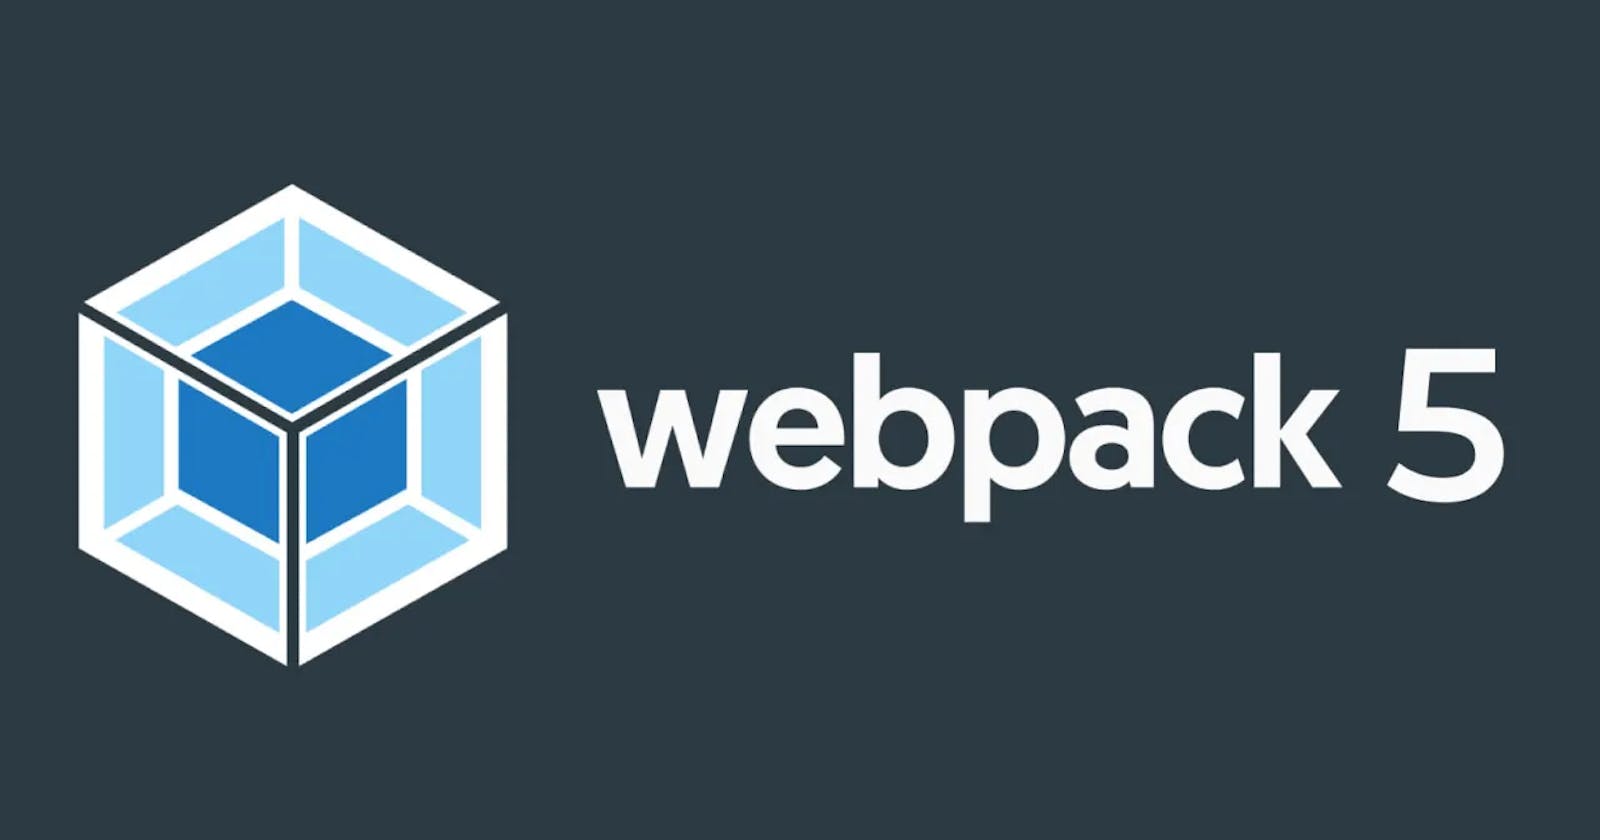 Let's learn Webpack together! Basics to Intermediate